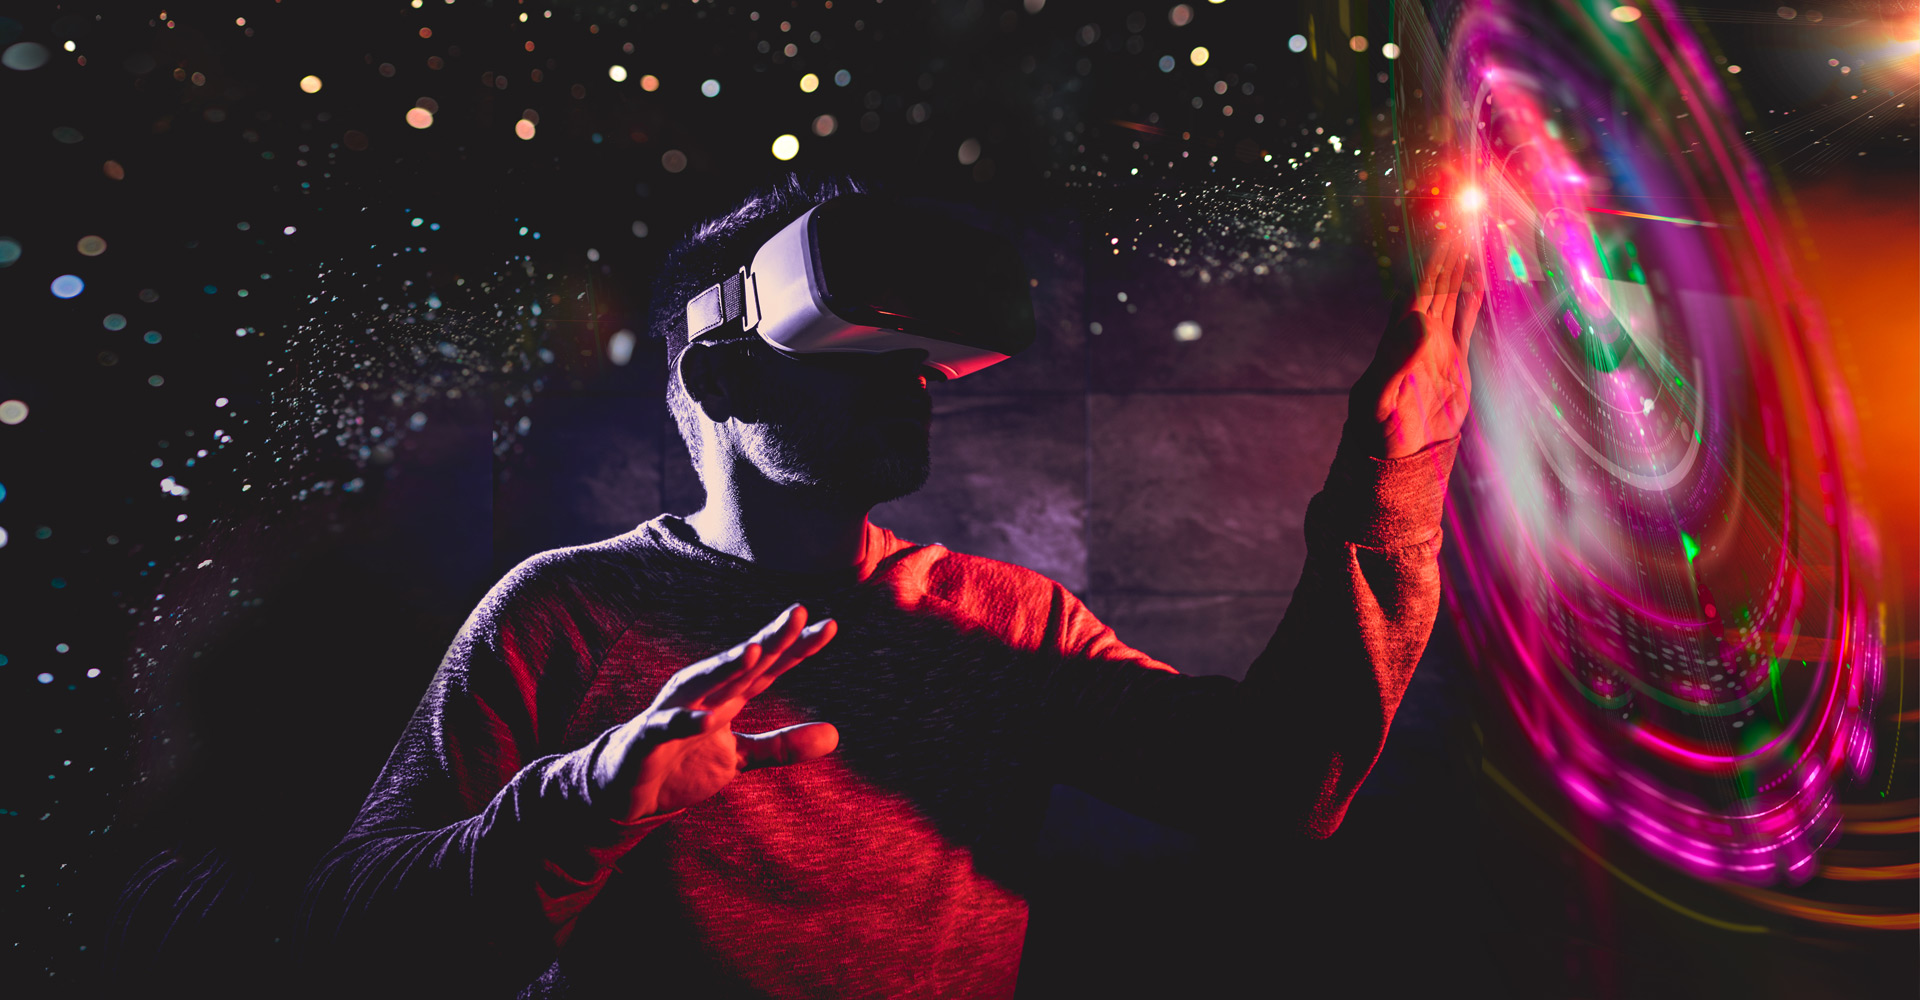 Facebook Builds Metaverse With XR Programs | Avast